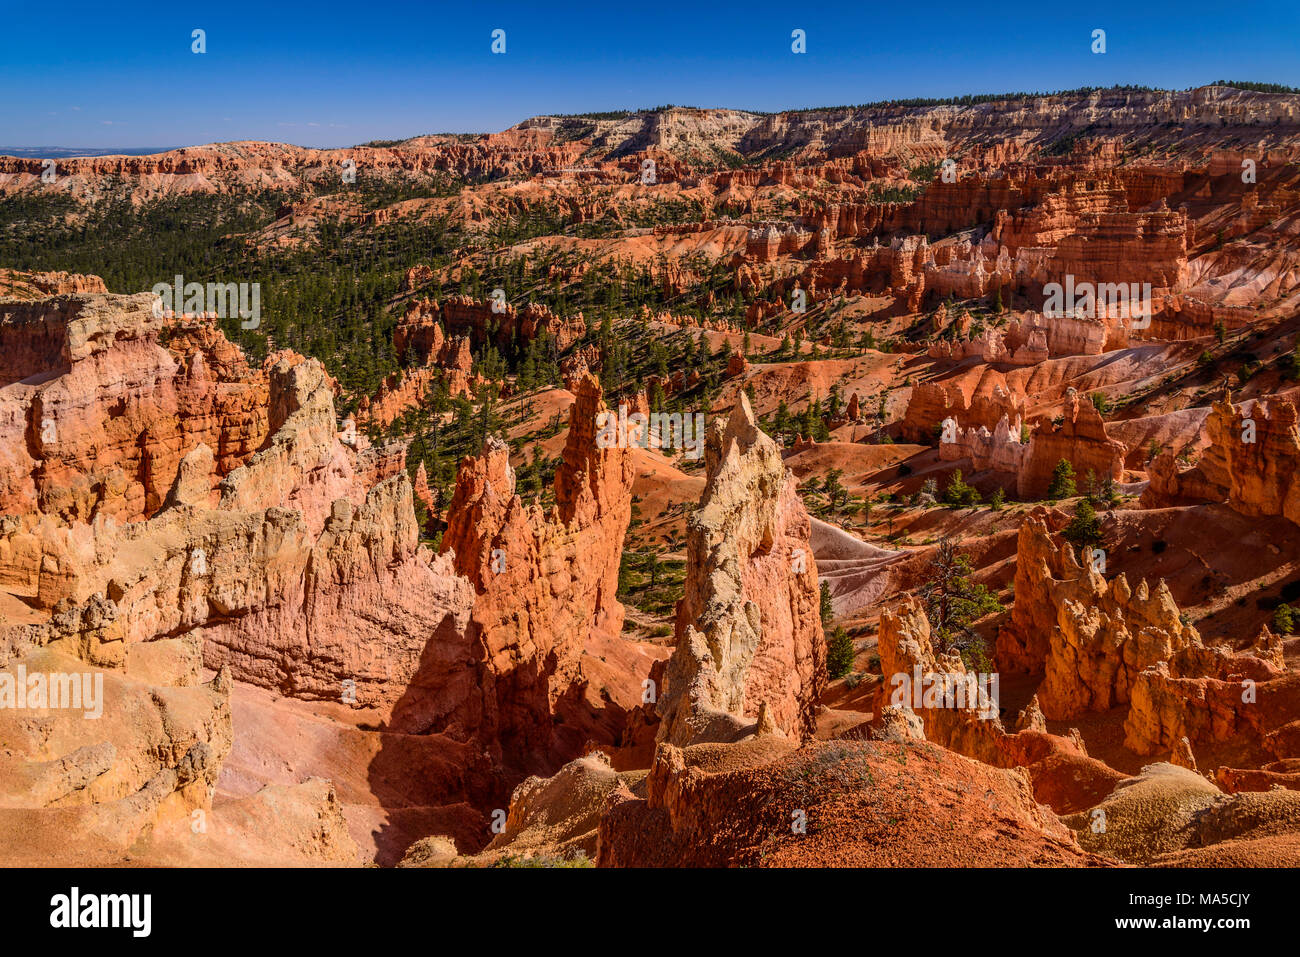 USA, Utah, Garfield County, Bryce Canyon National Park, Sunrise Point, Amphitheater with Queens Garden Stock Photo